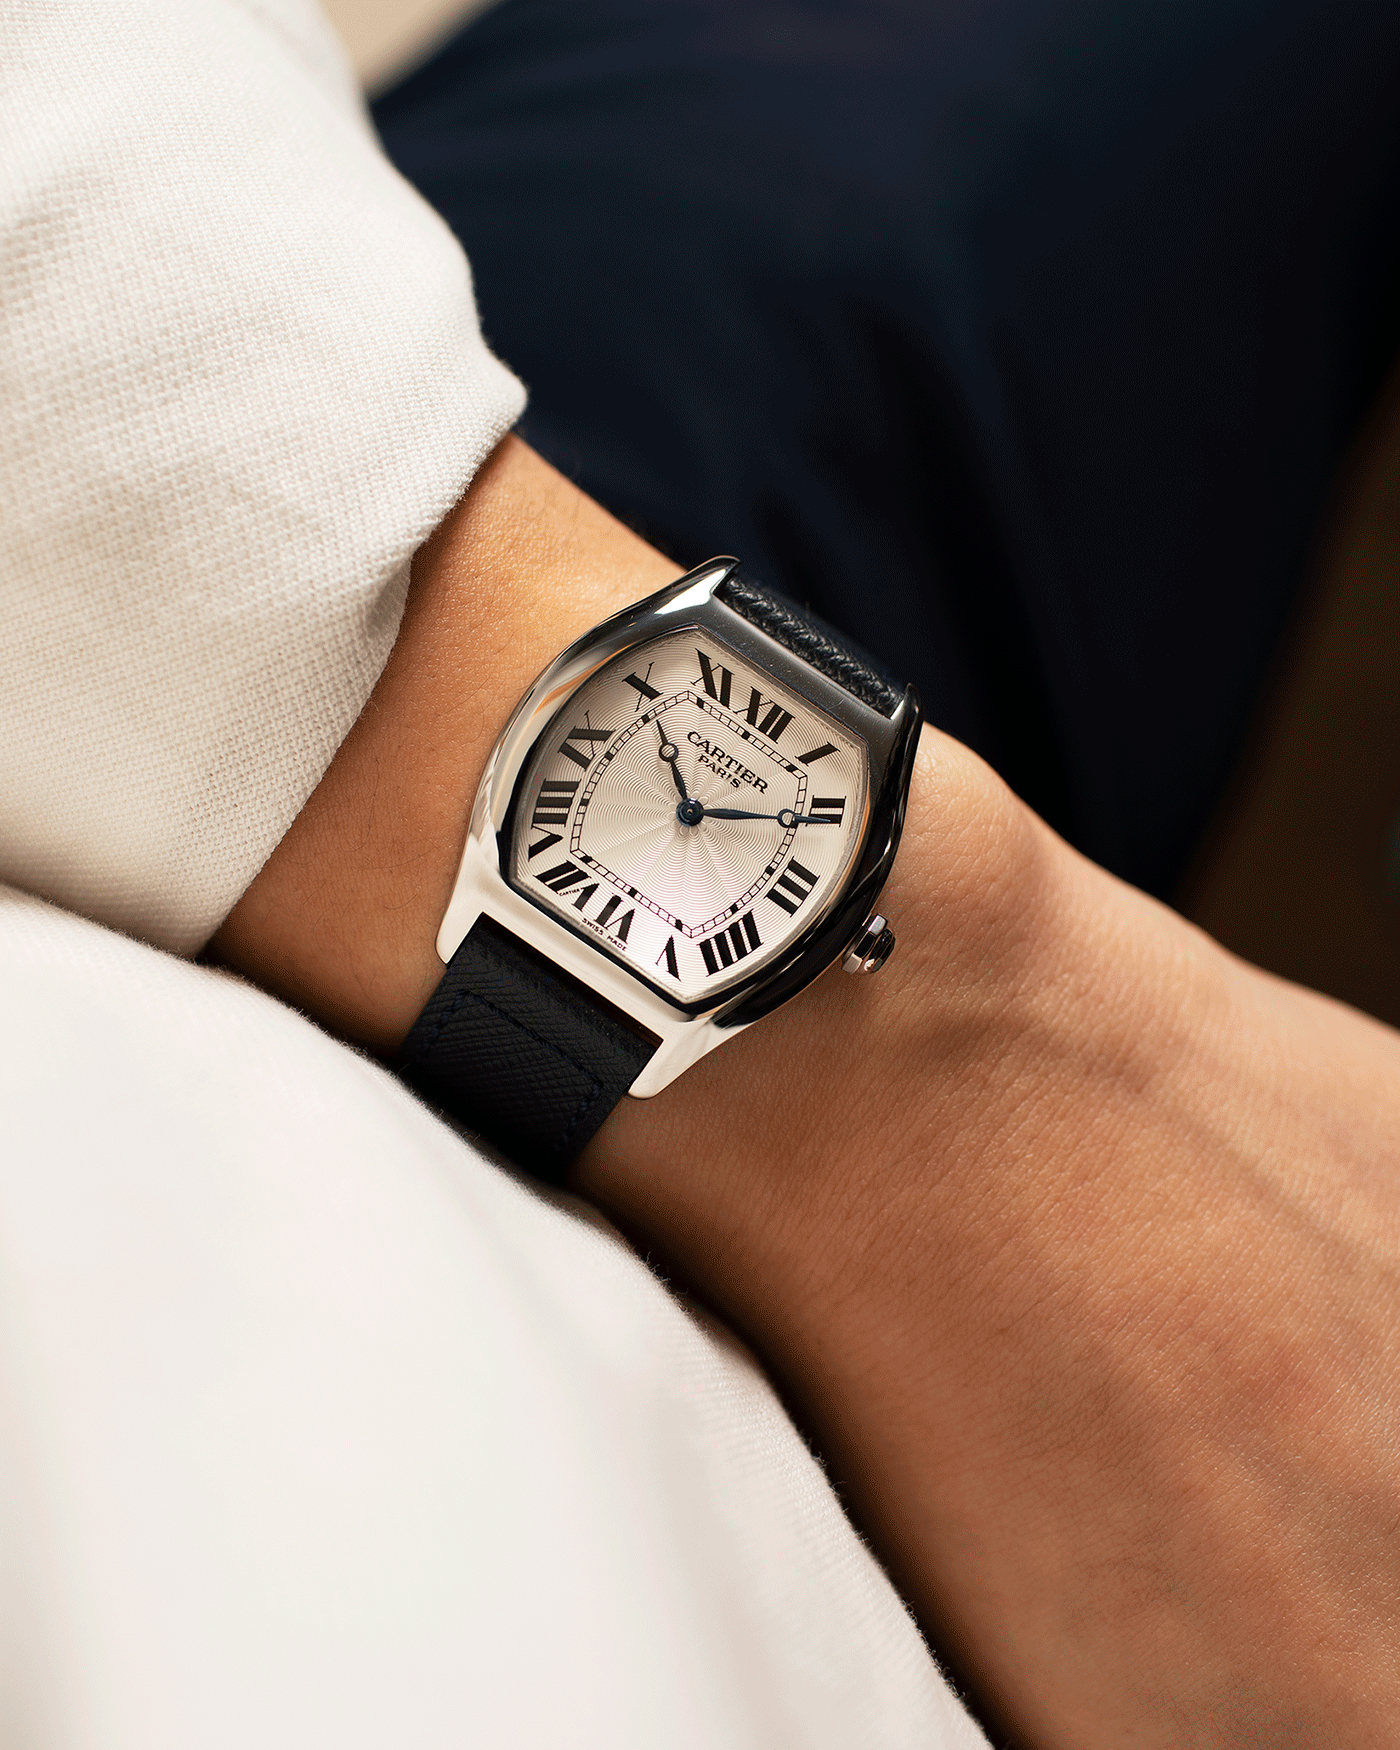 Brand: Cartier Year: 2000’s Model: CPCP Collection Prive Tortue Reference: 2518 Material: Platinum Movement: Cartier Jaeger LeCoultre 9601MC Case Diameter: 43 x 35 mm Strap: Navy Blue Molequin Textured Calf Strap with 18k White Gold Deployant